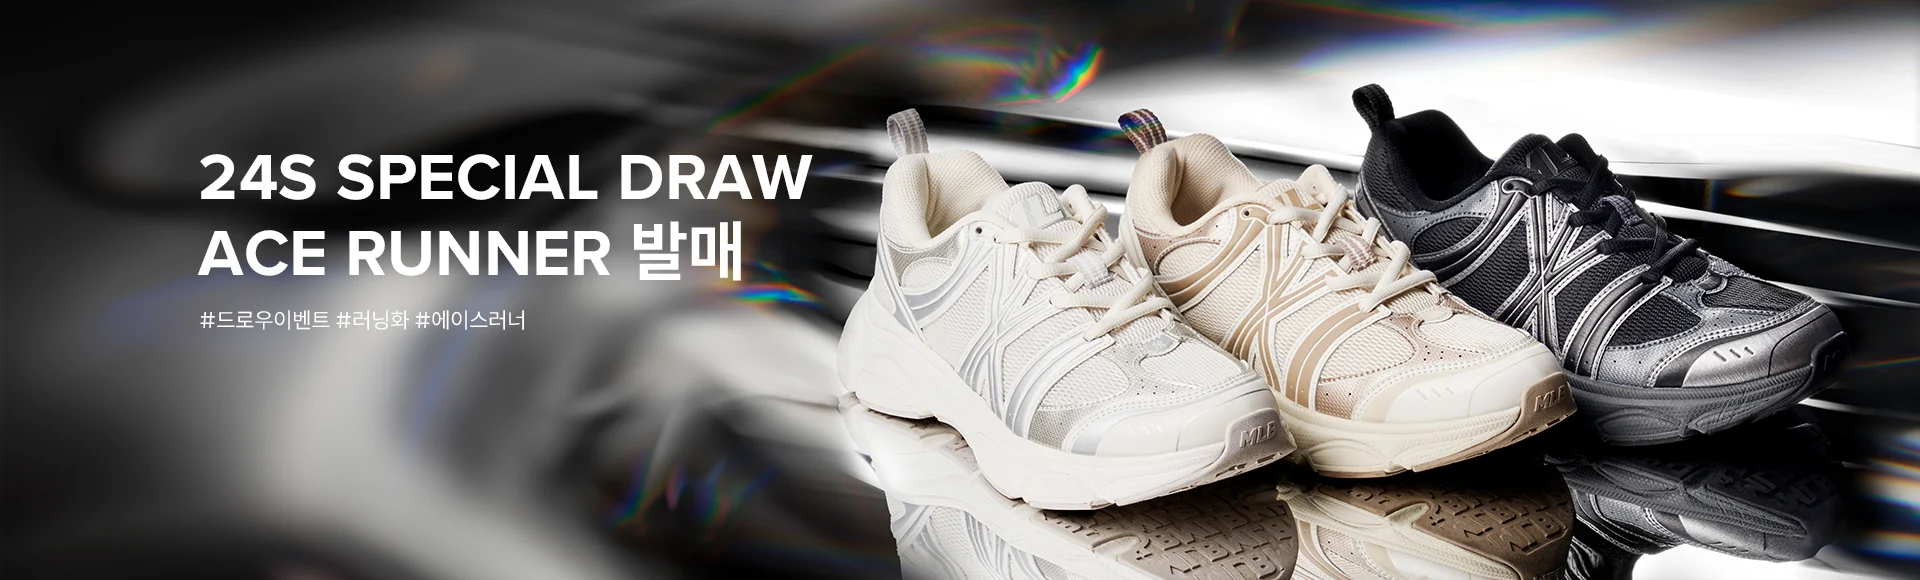 24S SPECIAL DRAW ACE RUNNER 발매